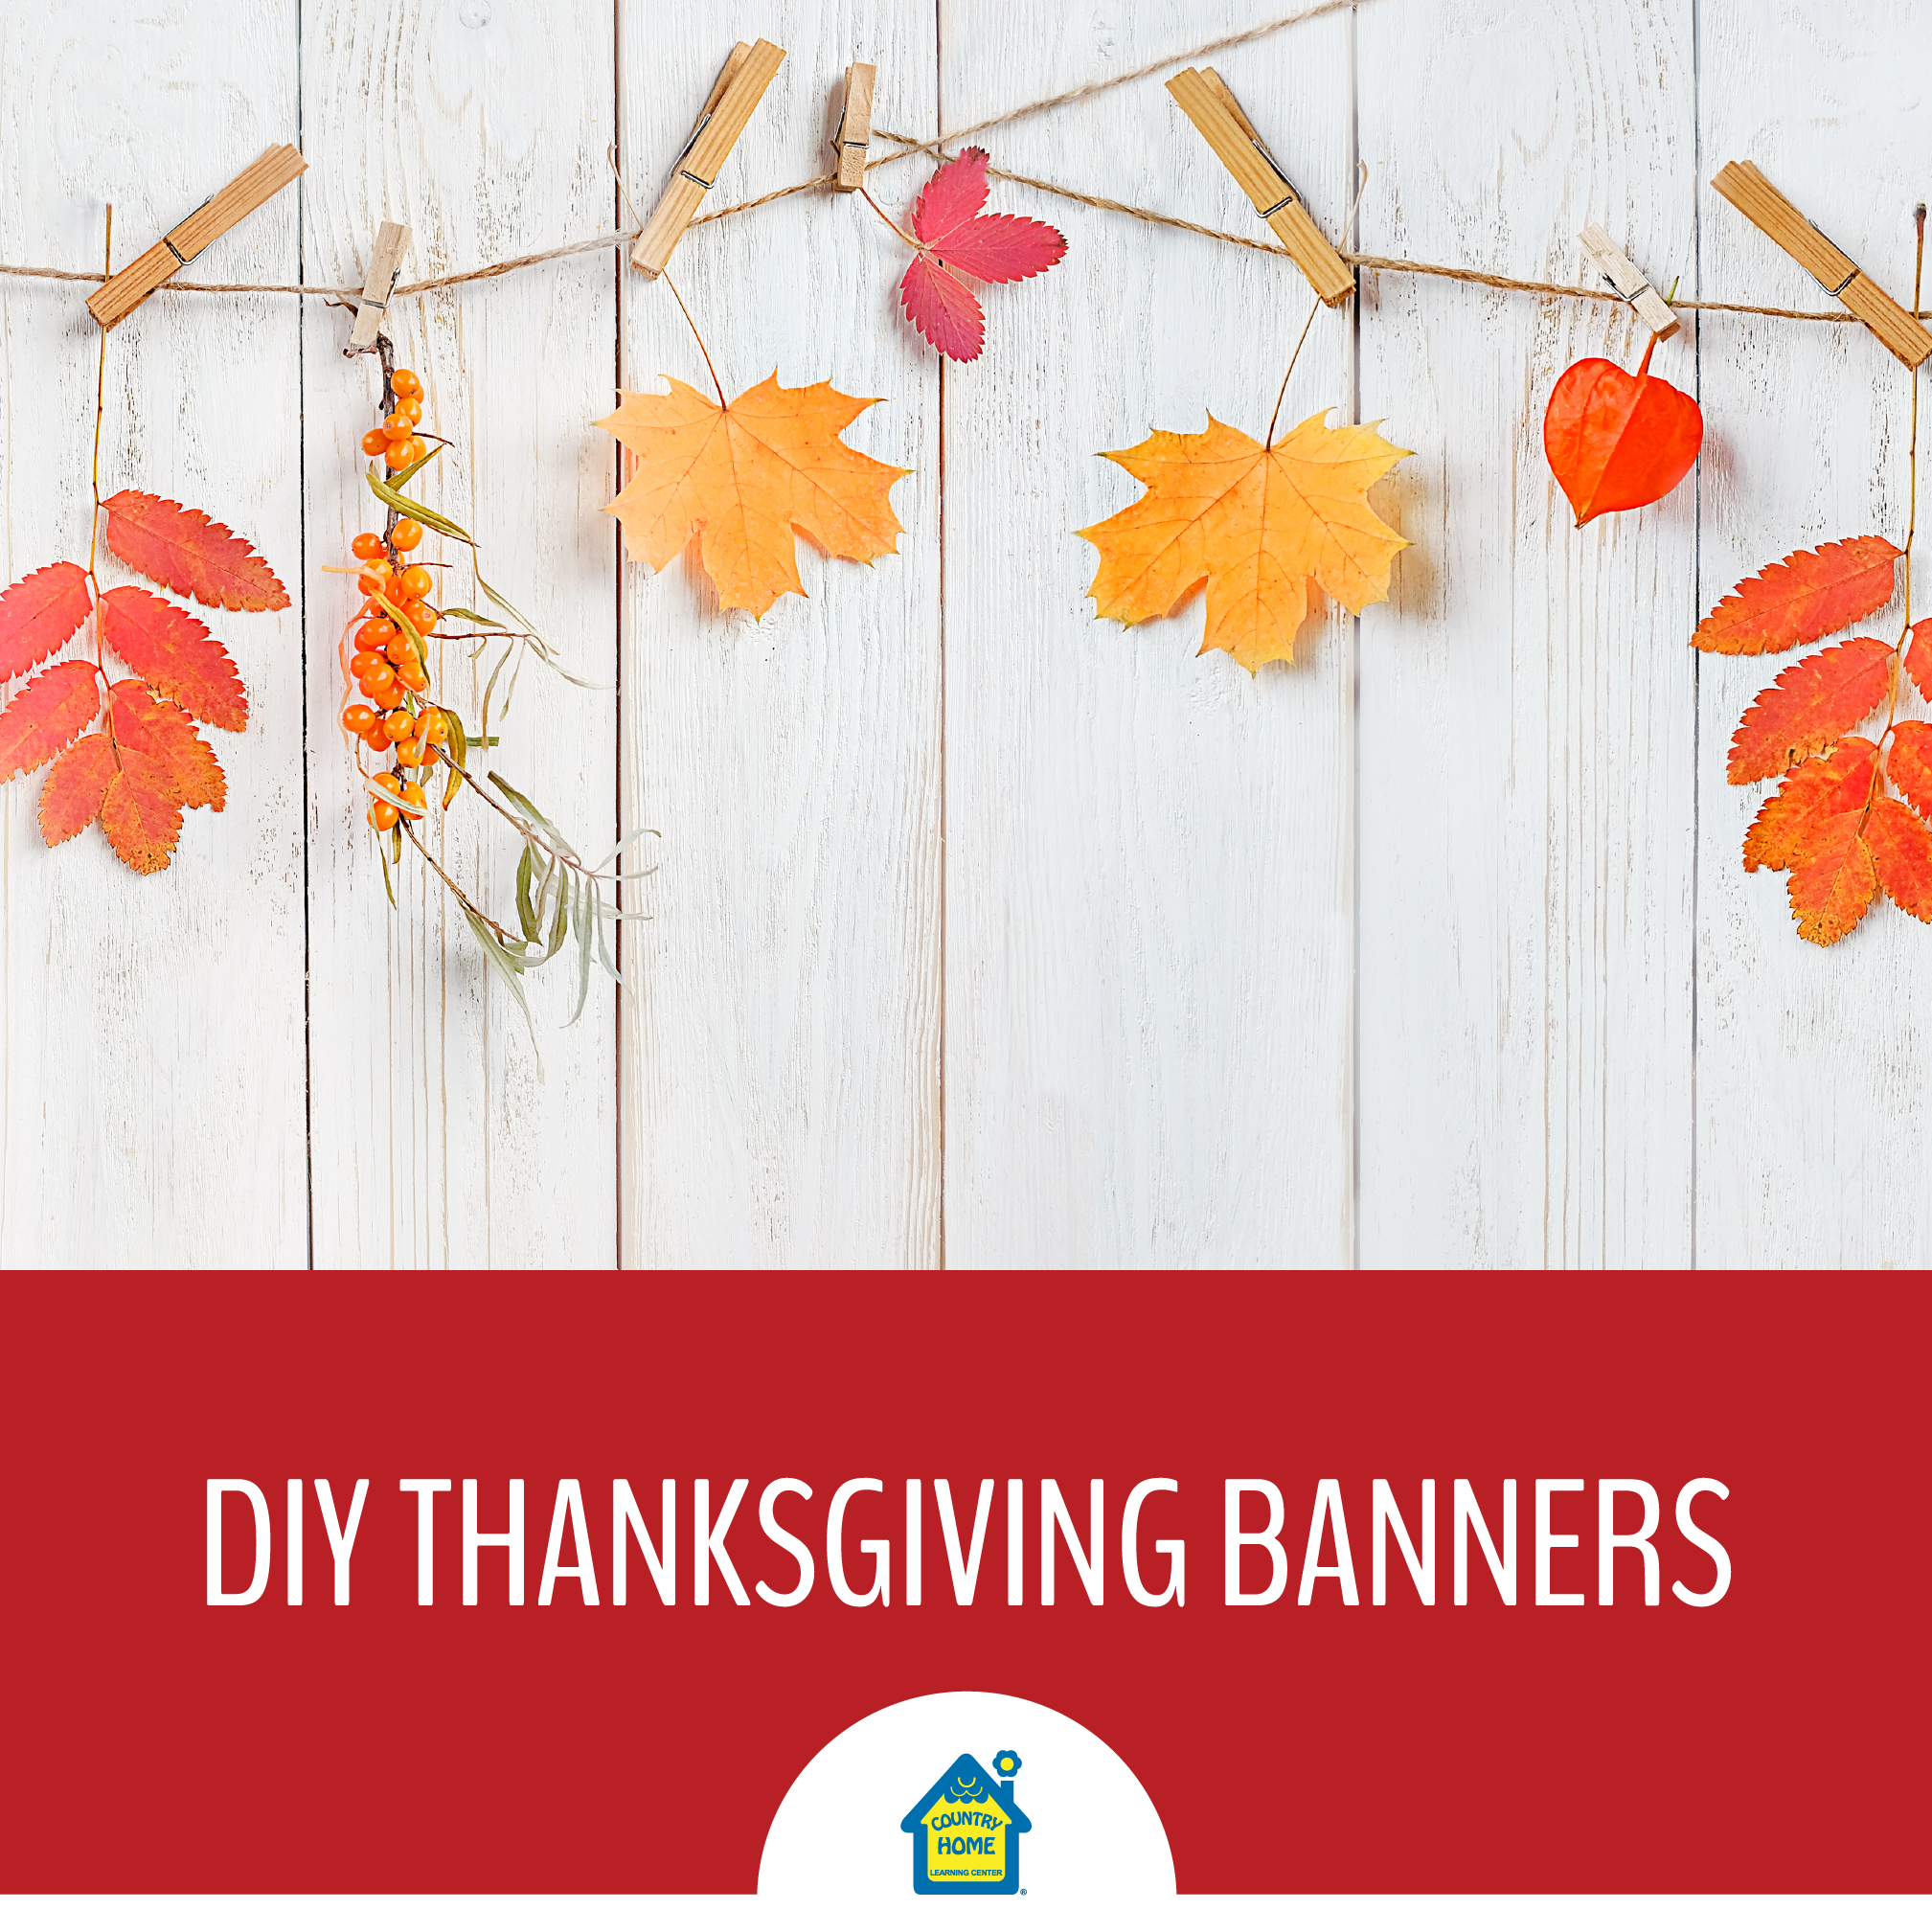 Diy Thanksgiving Banners Country Home Learning Center